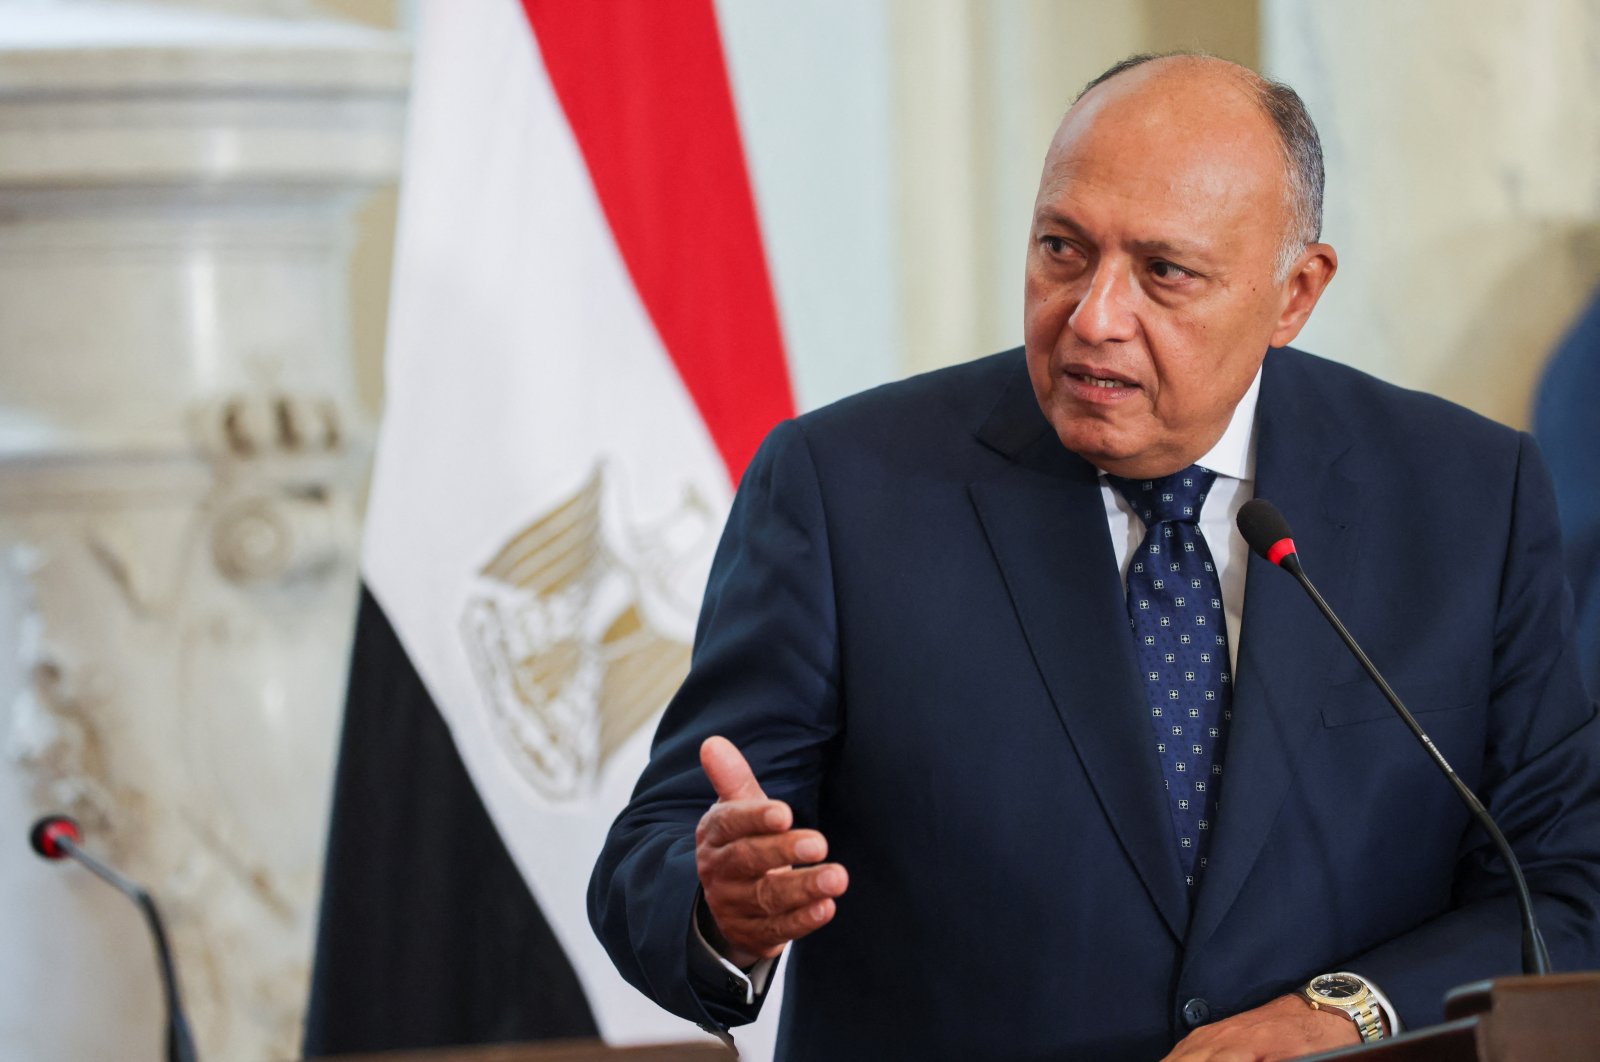 Egyptian Foreign Minister Sameh Shoukry speaks during a news conference with Foreign Minister Mevlüt Çavuşoğlu in Cairo, Egypt, March 18, 2023. (Reuters File Photo)